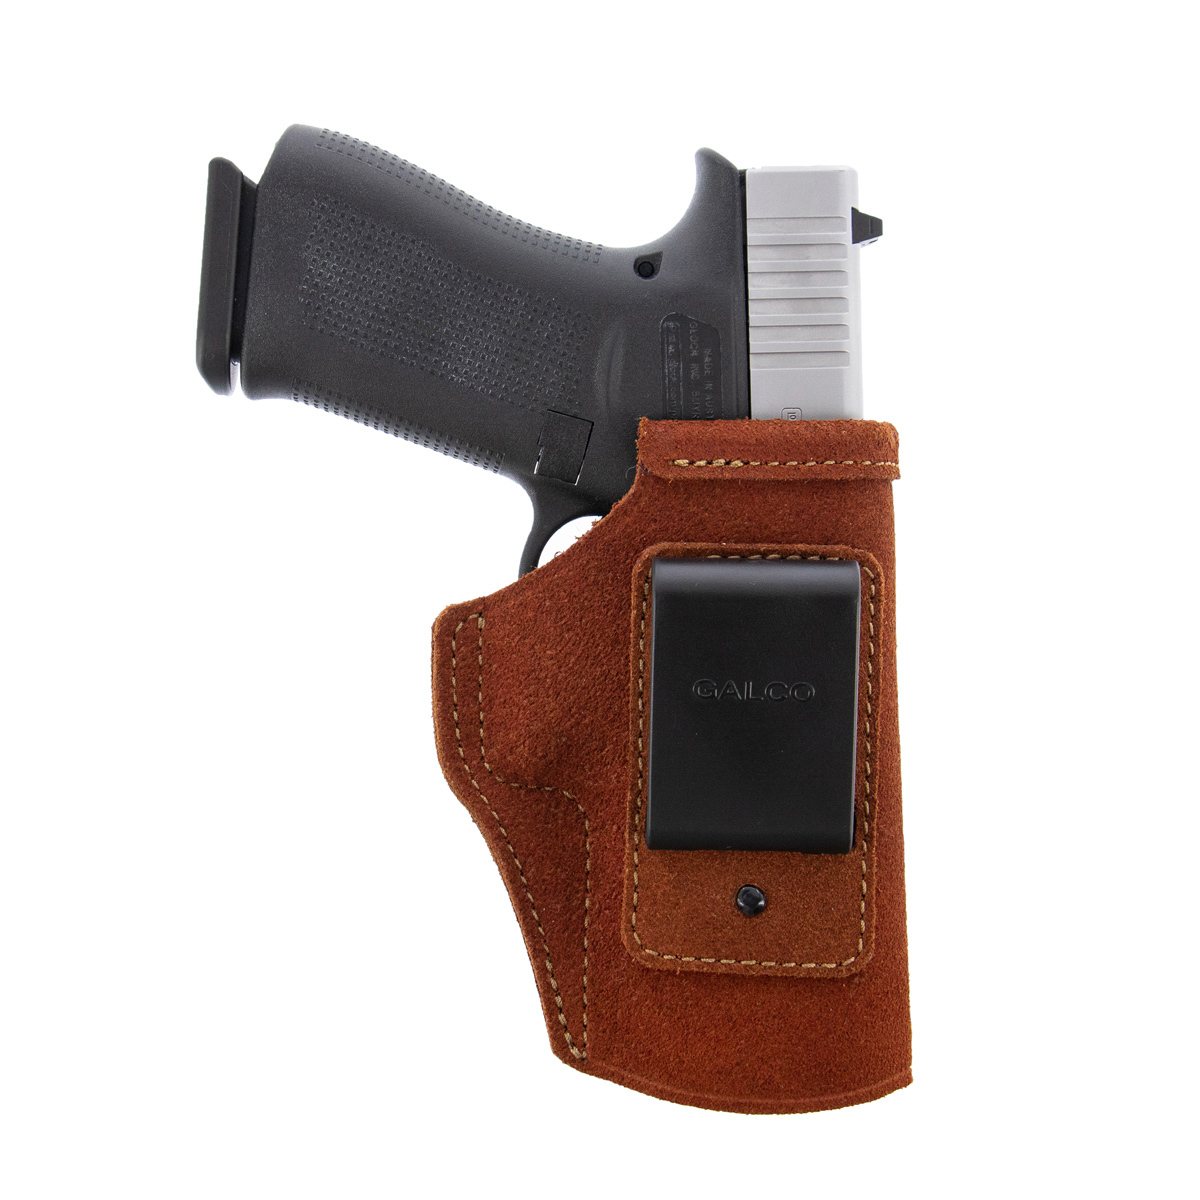 Galco Gunleather Neutral Cant Concealment Stow-N-Go Inside the Waistband Holster 